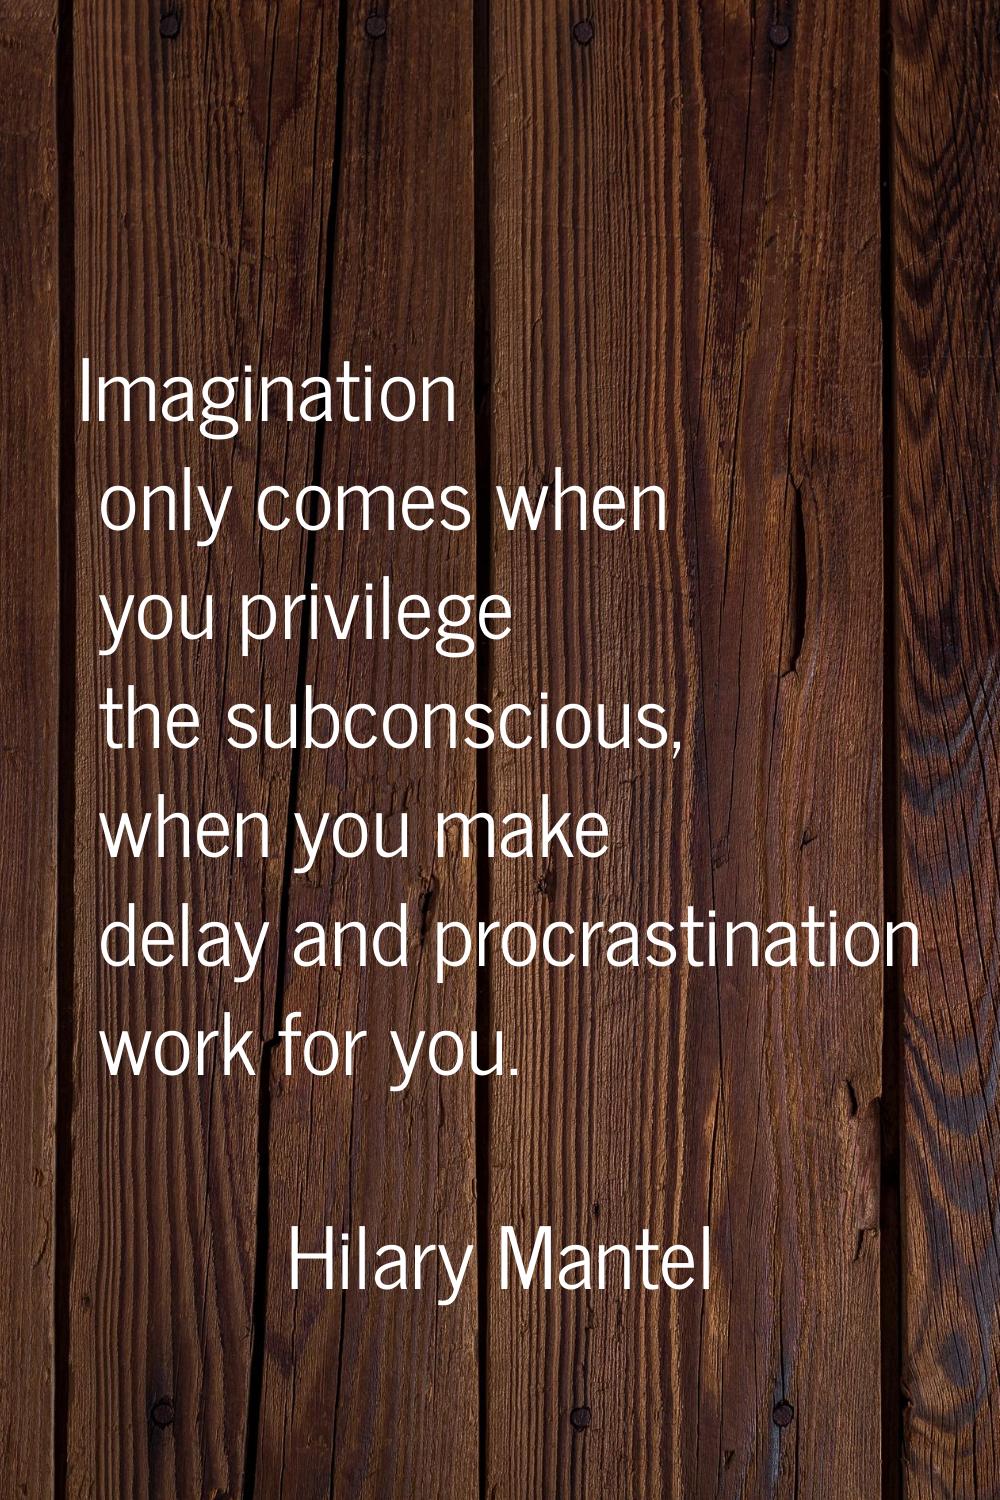 Imagination only comes when you privilege the subconscious, when you make delay and procrastination